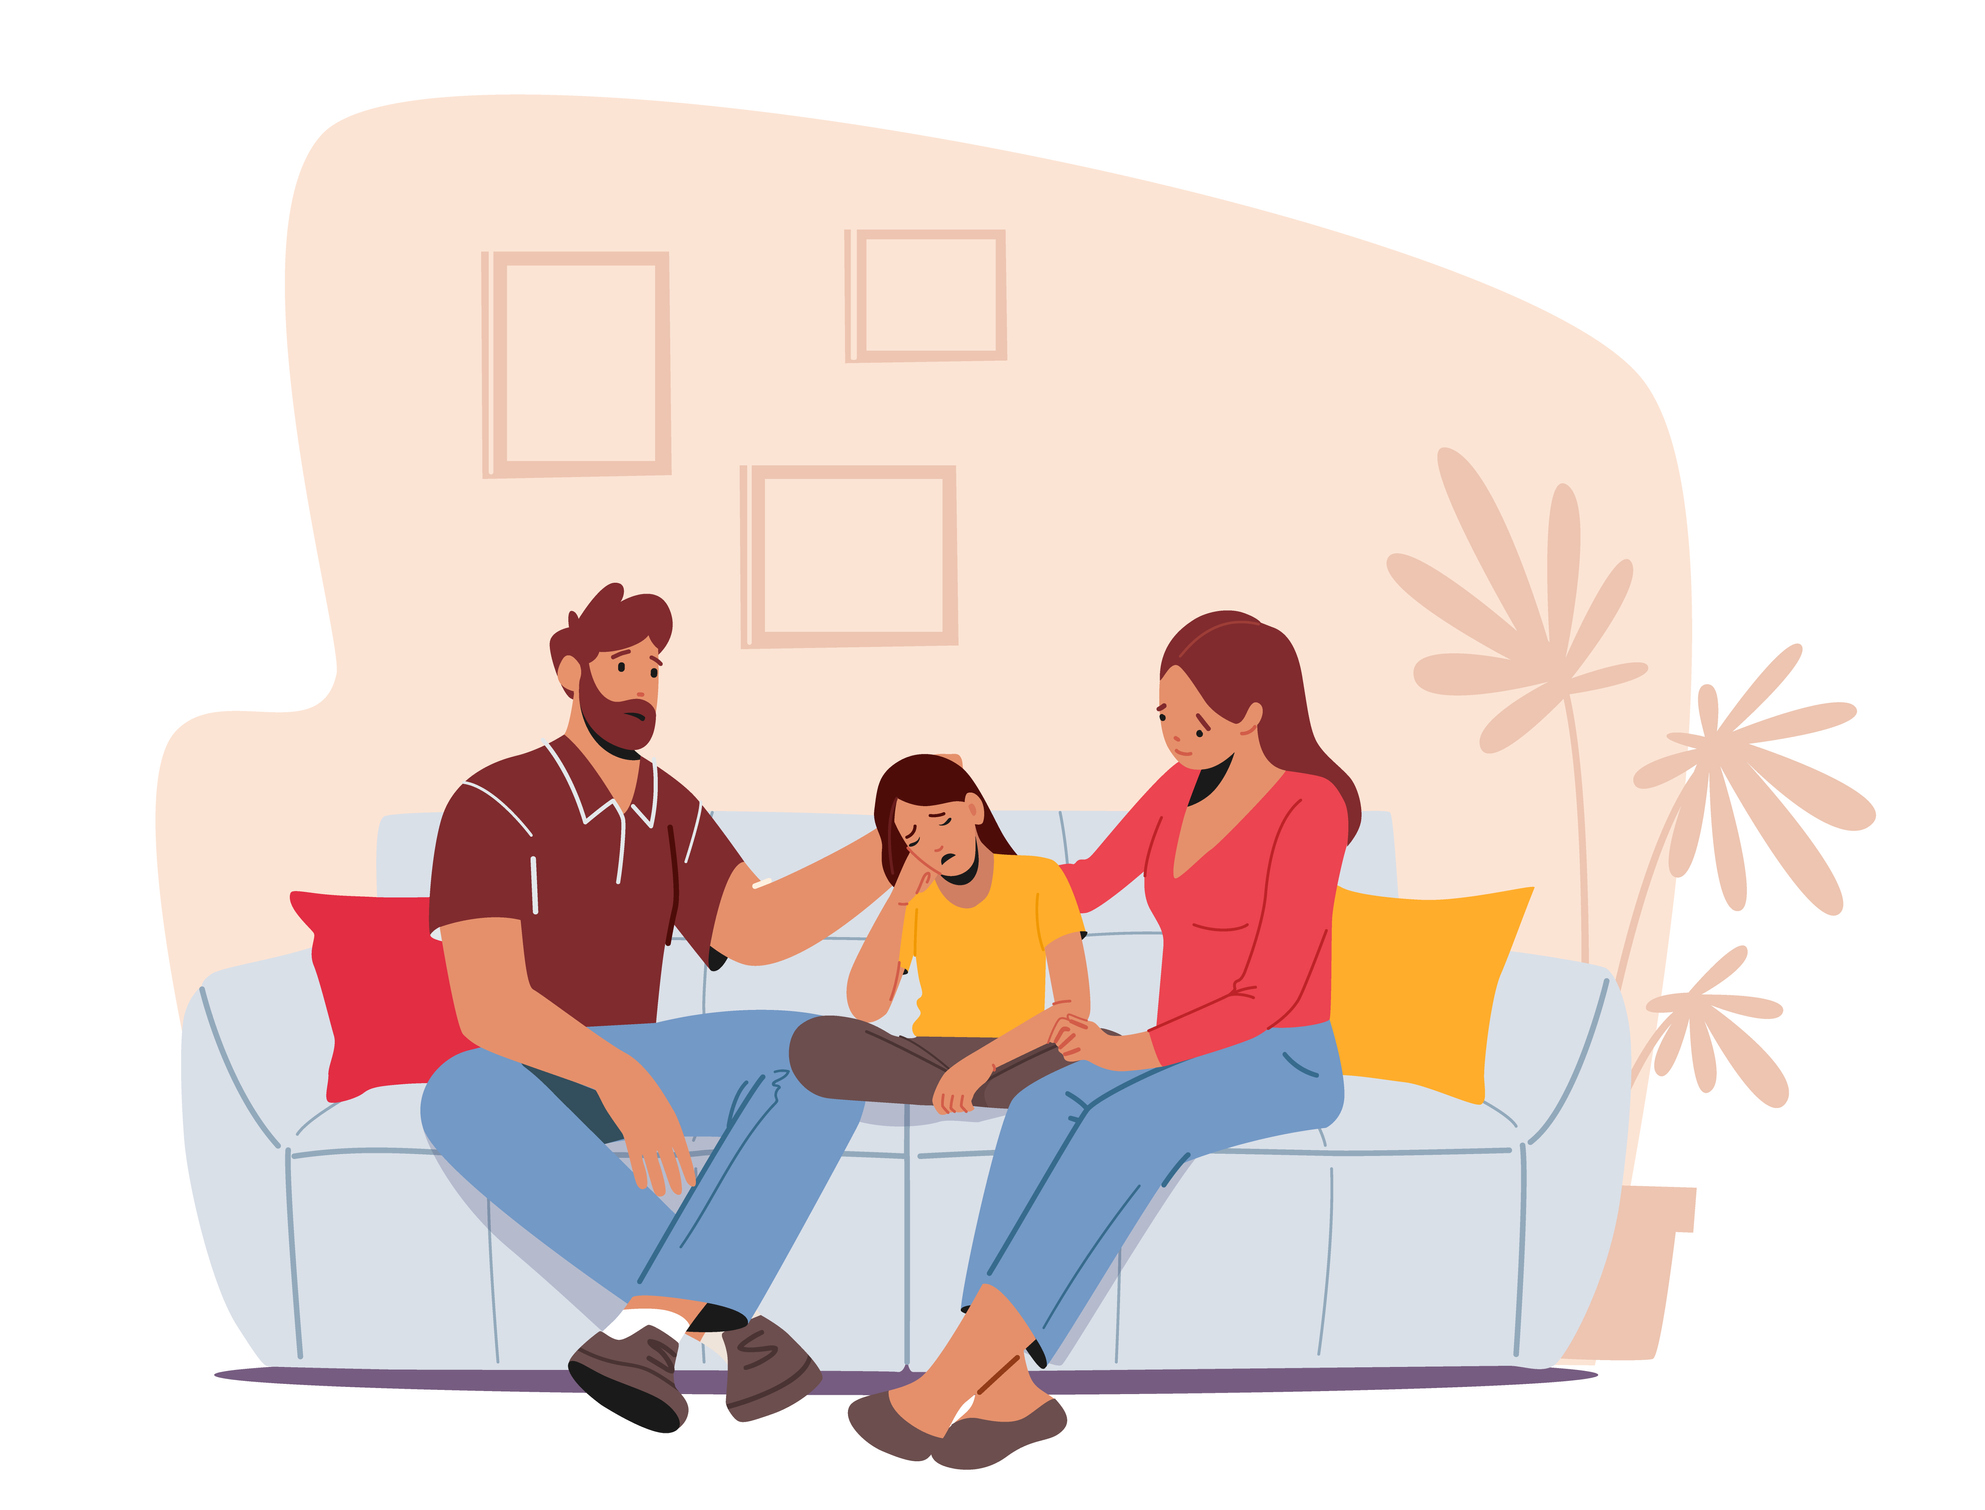 Illustration of mom and dad comforting child on couch - Parenting a Child with Mental Health Issues